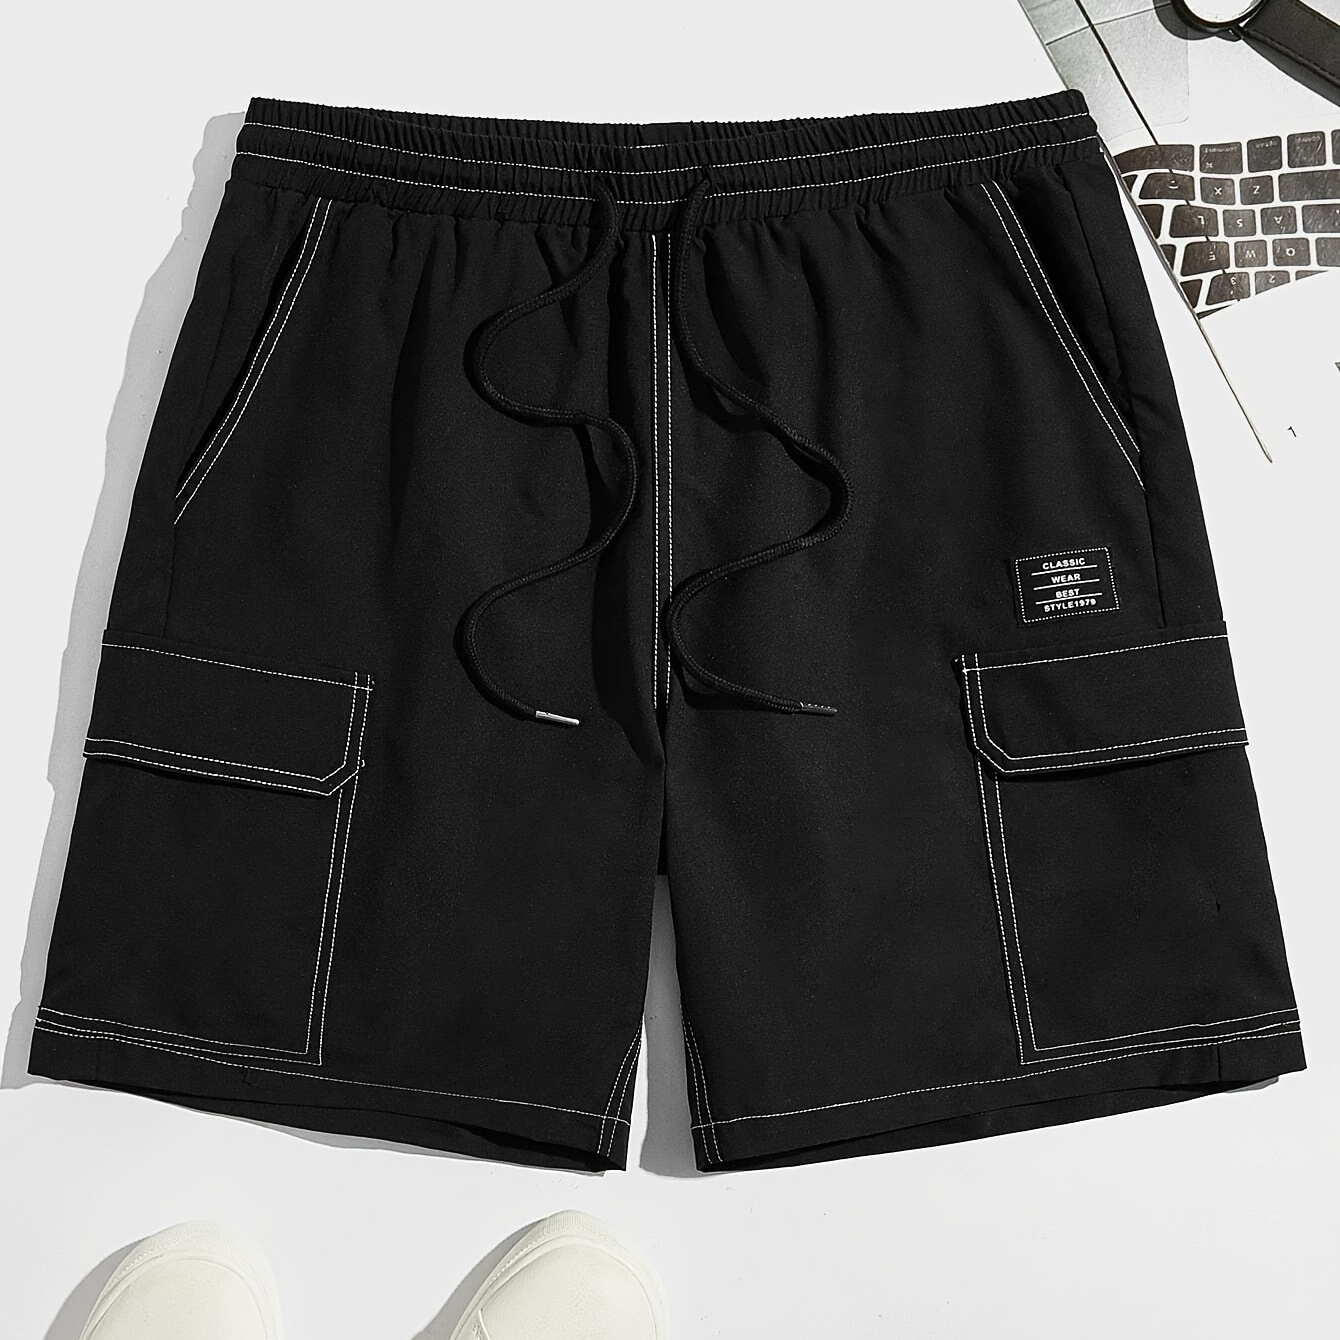 

Men's Athletic Shorts With Drawstring And Flap Pockets In Solid Color, Lightweight And Stylish For Summer Sports And Casual Wear